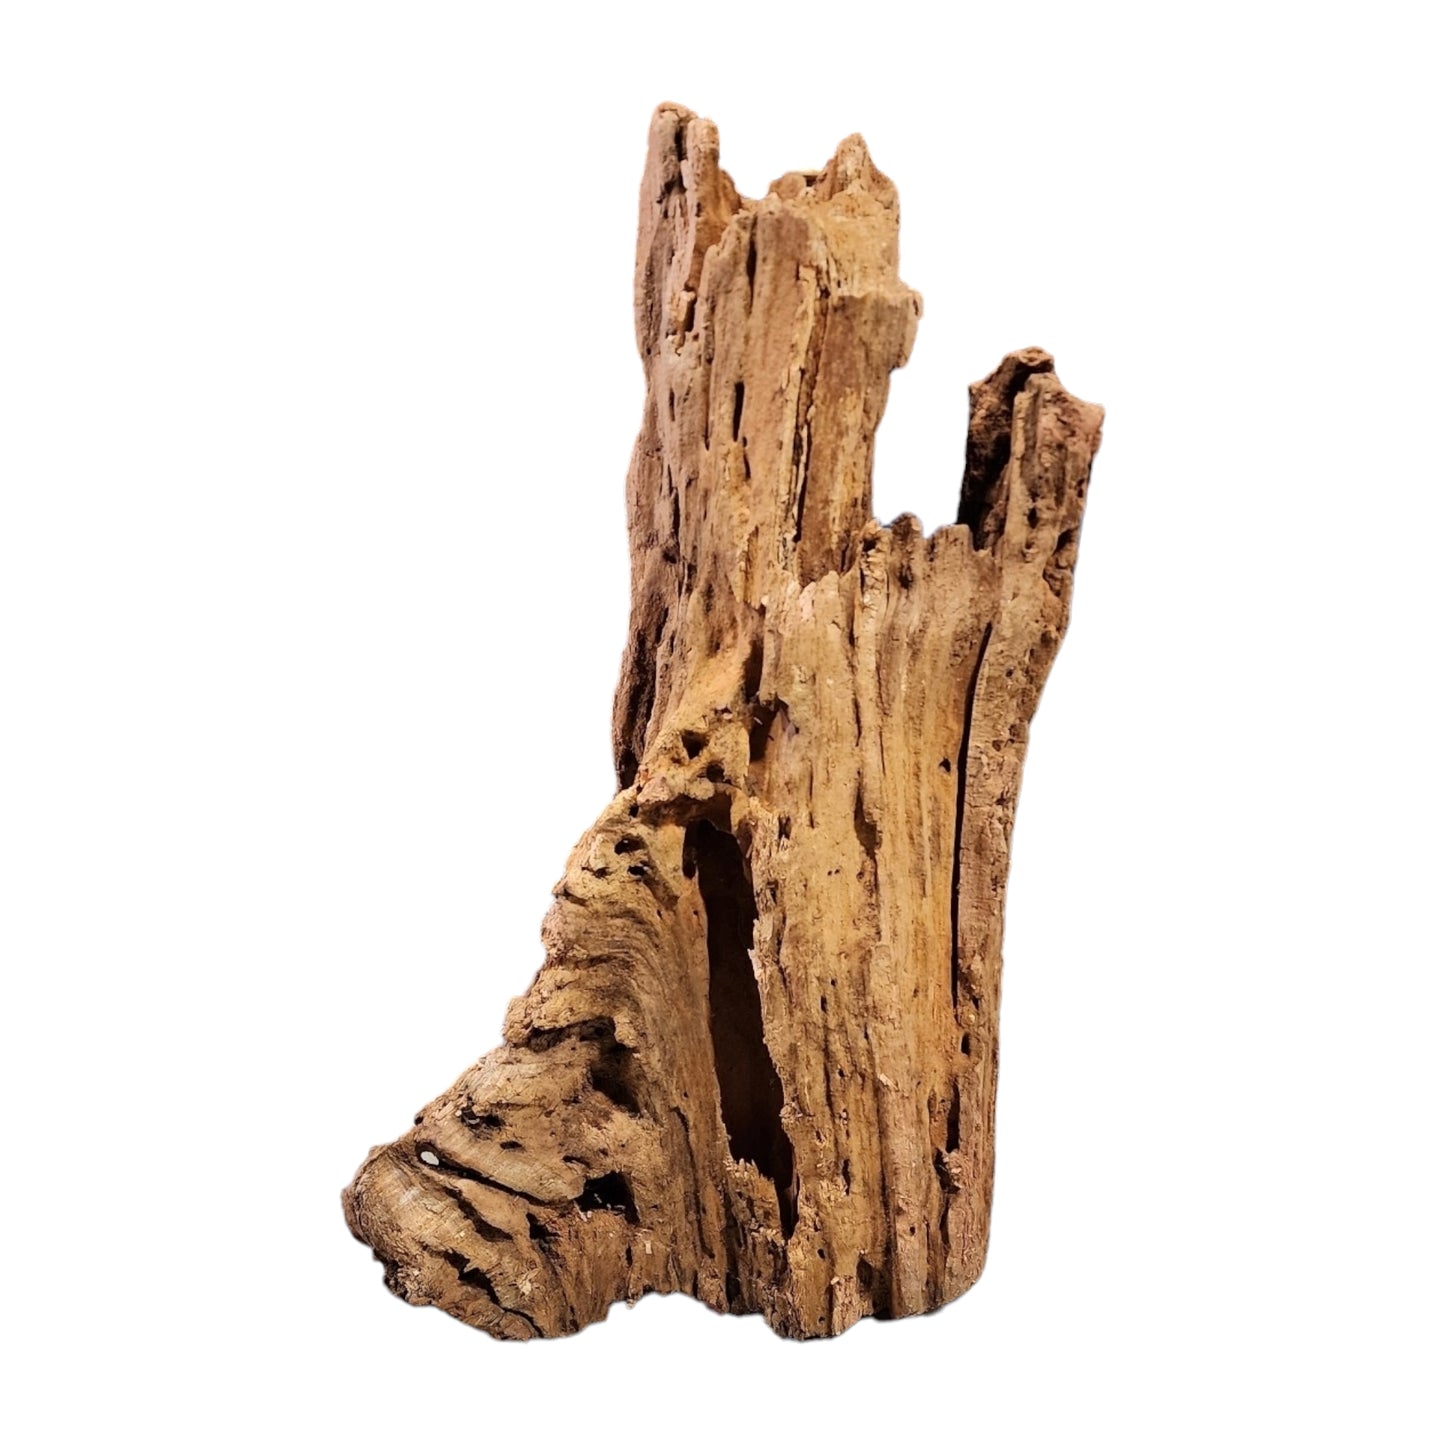 19.5 to 23.6 inch - TEXTURE DRIFTWOOD - XL 50 to 60cm - Indonesia - NEW923 - #1